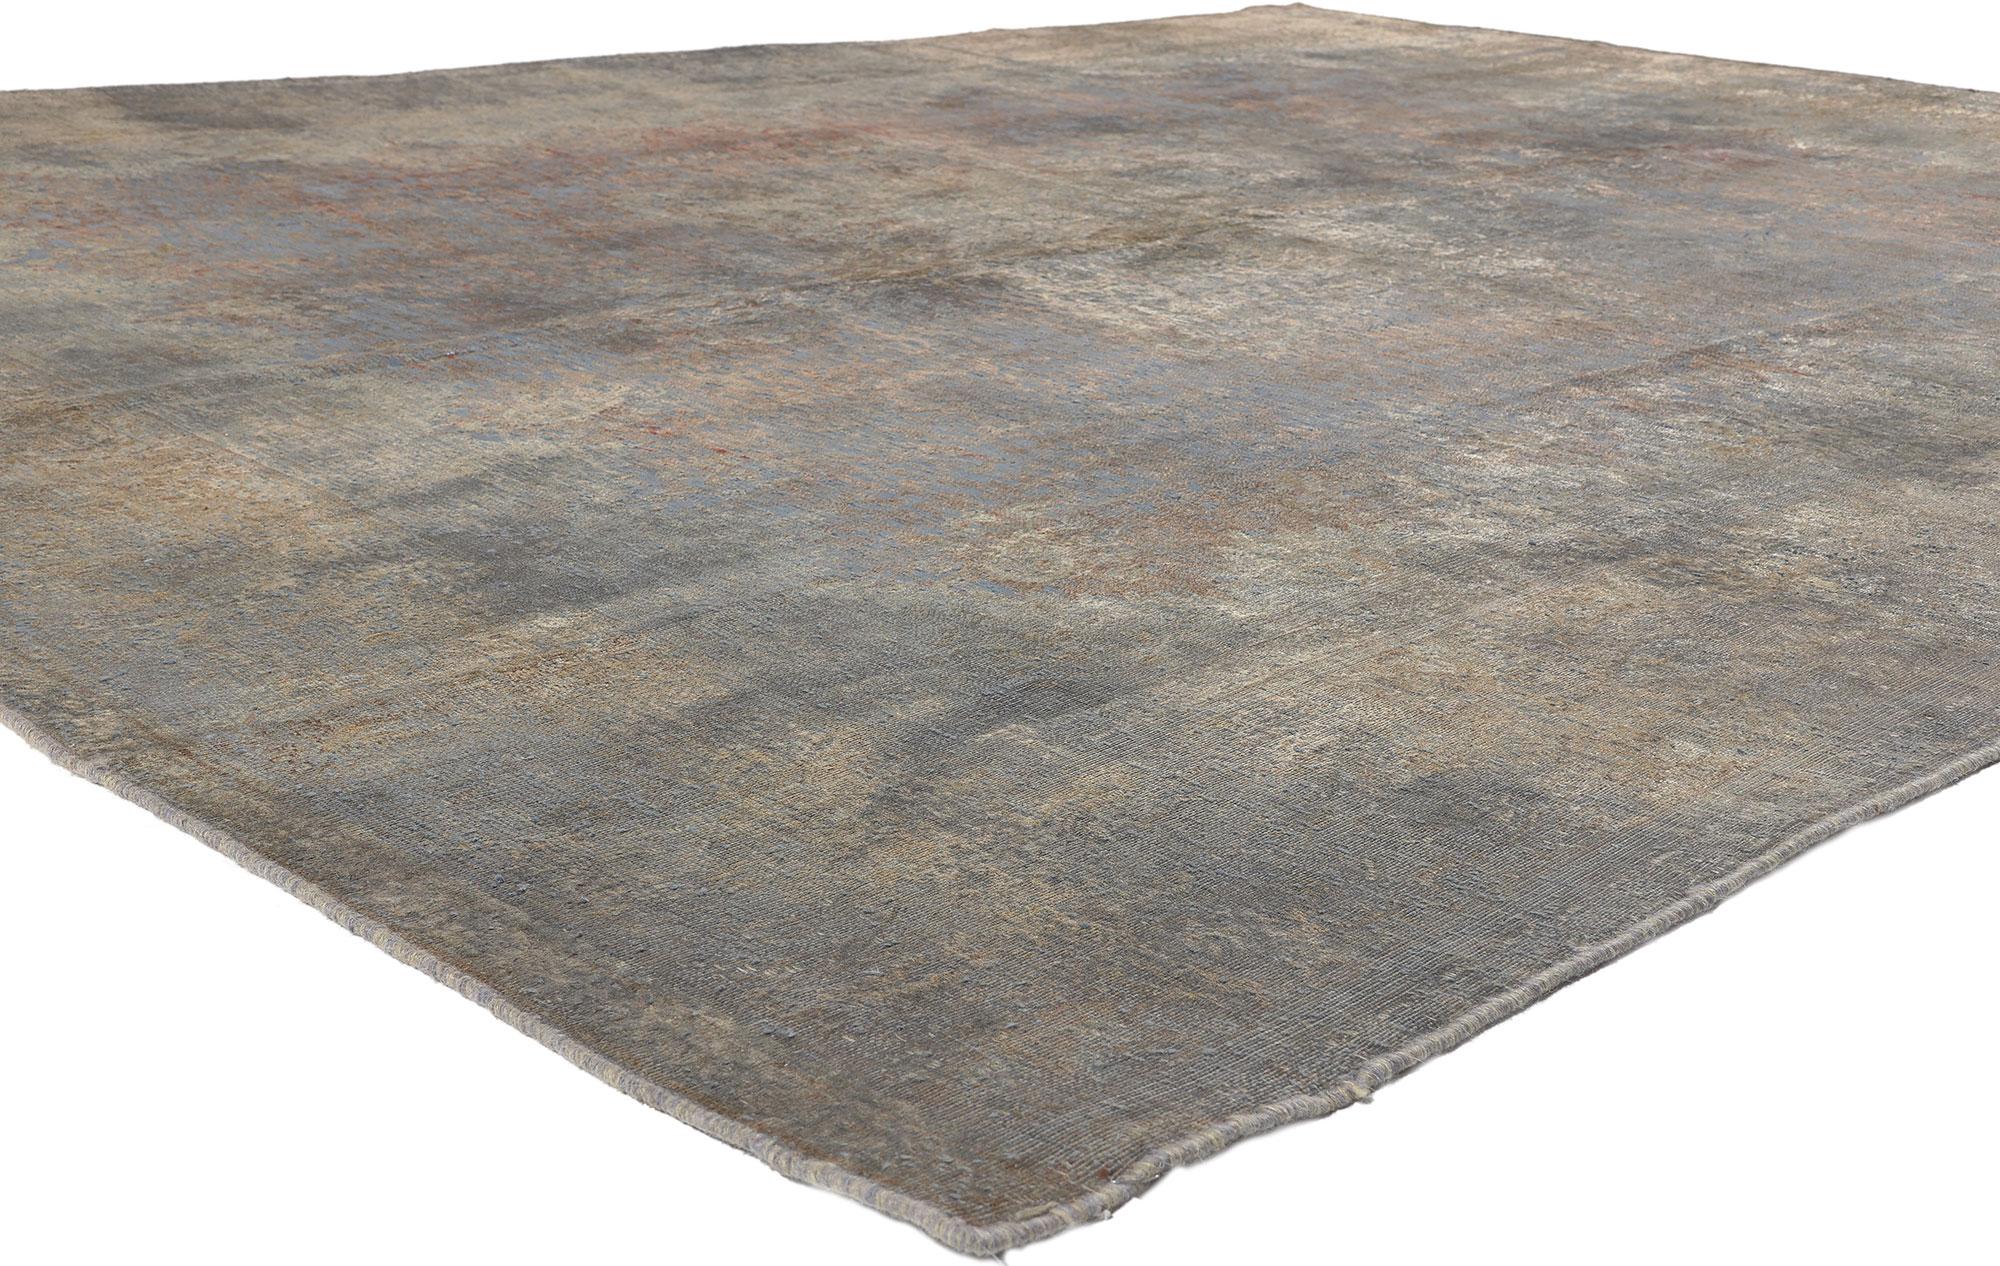 60764 Vintage Turkish Overdyed Rug, 08’11 x 11’08.
Prepare to be floored (literally) by the meeting of luxe utilitarian appeal and Belgian Chic in this hand-knotted wool vintage Turkish overdyed rug. It's not just a rug; it's a style symphony with a